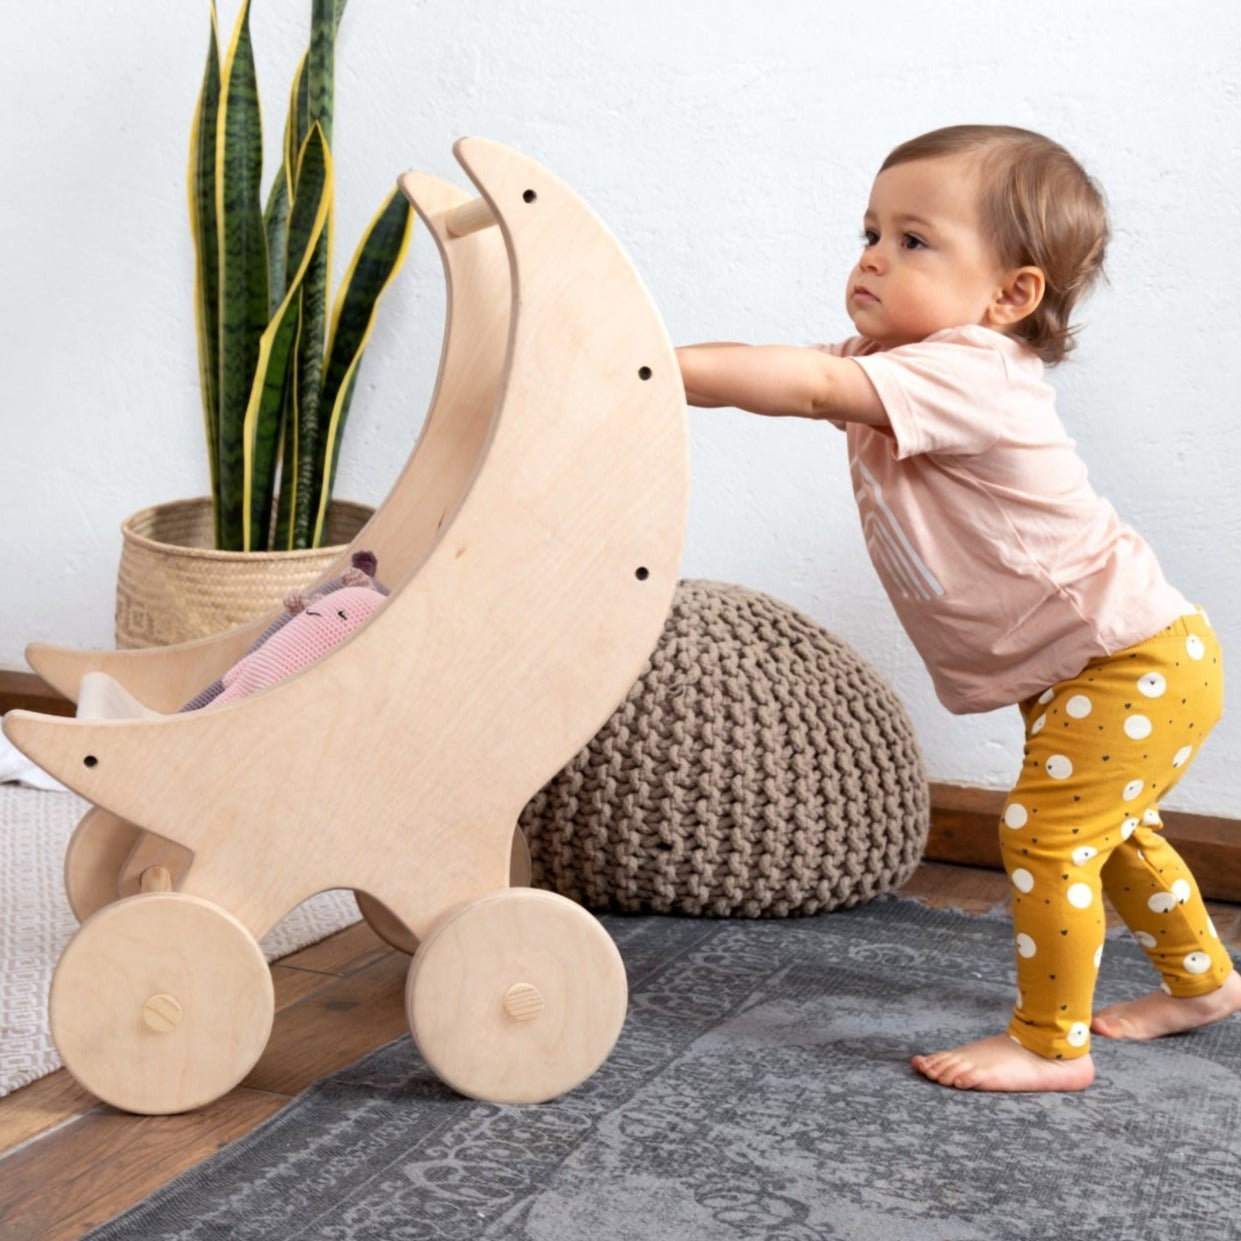 MOON SHAPED DOLL STROLLER by Wiwiurka Toys